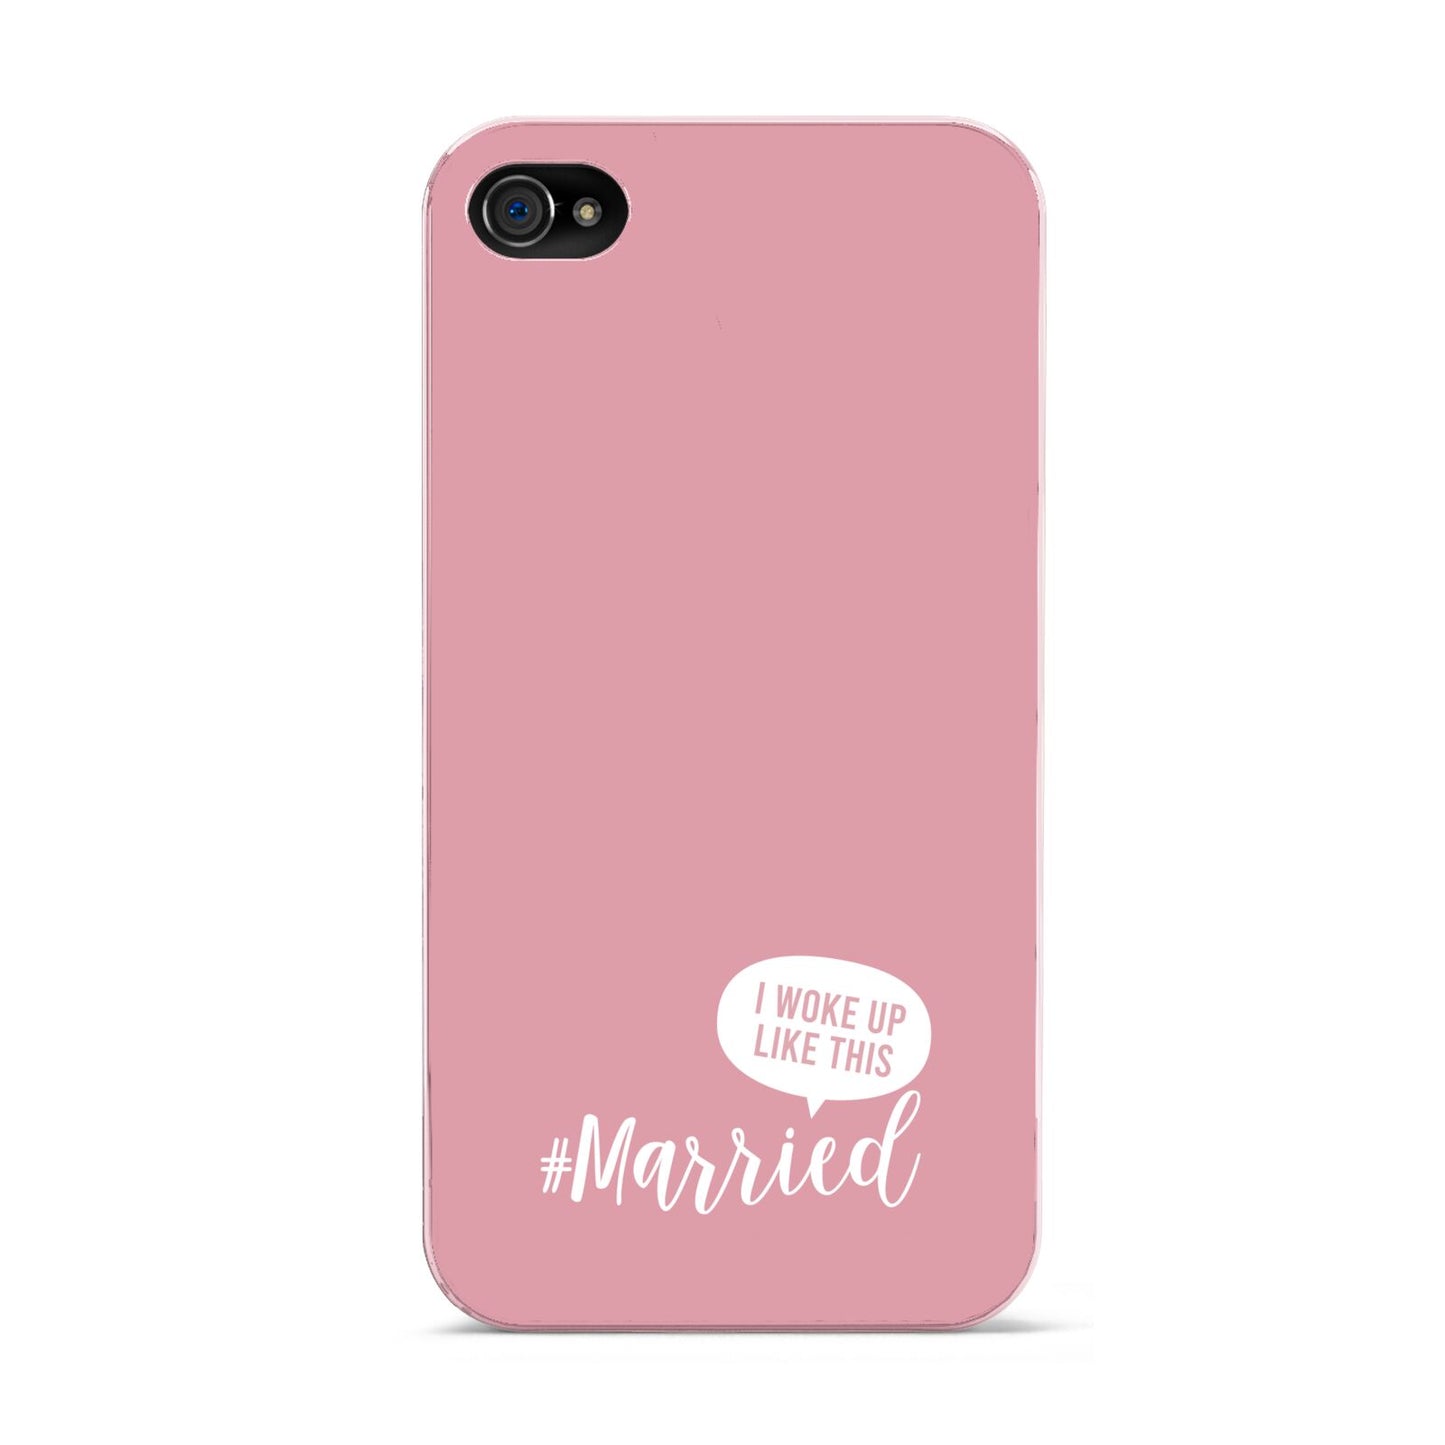 I Woke Up Like This Married Apple iPhone 4s Case